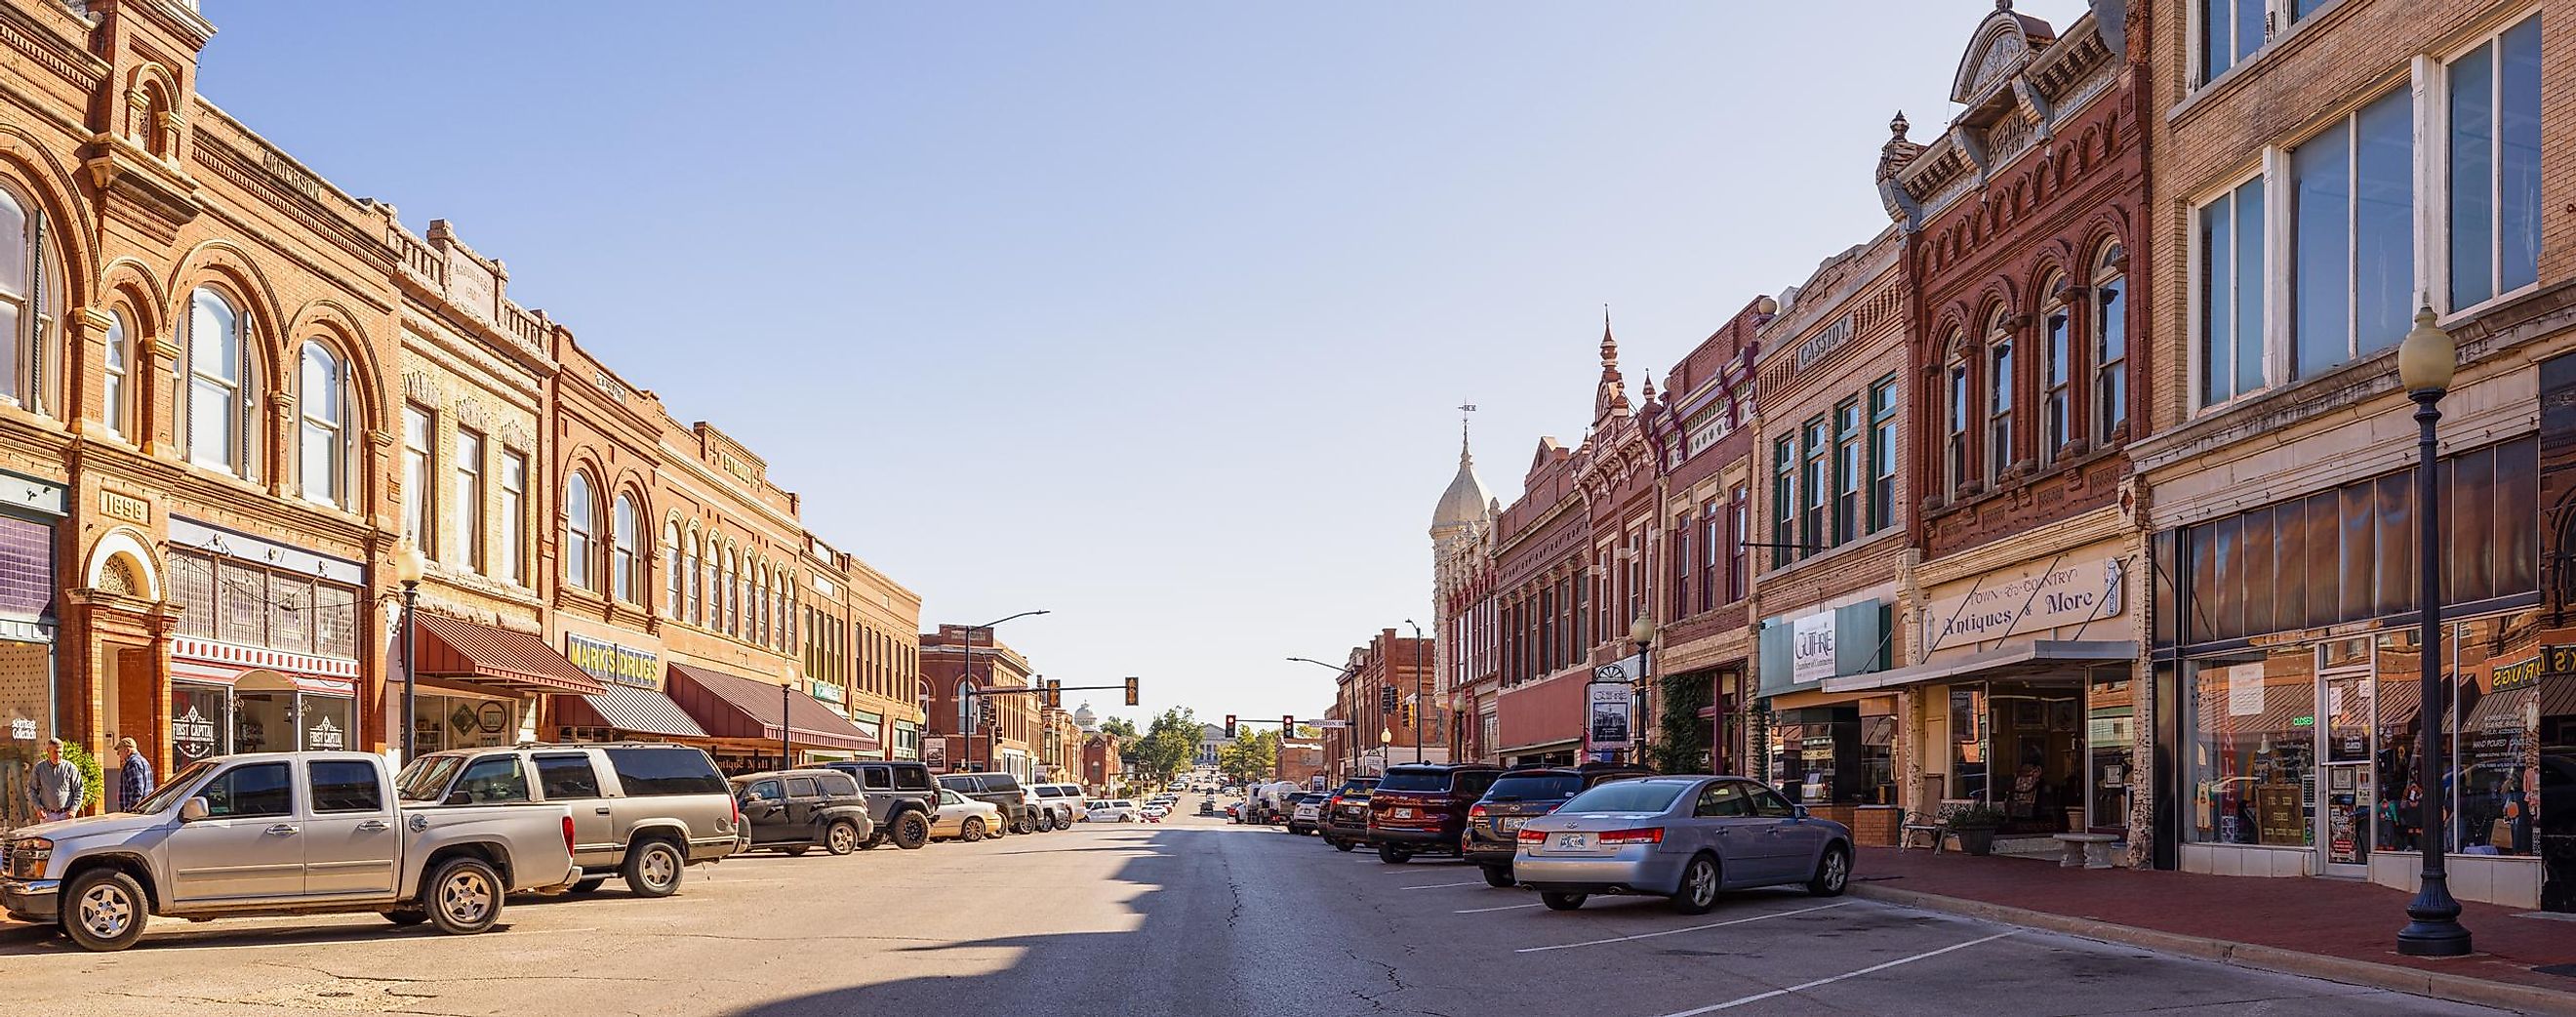 The old business district on Oklahoma Avenue in Guthrie, Oklahoma, USA. Editorial credit: Roberto Galan / Shutterstock.com